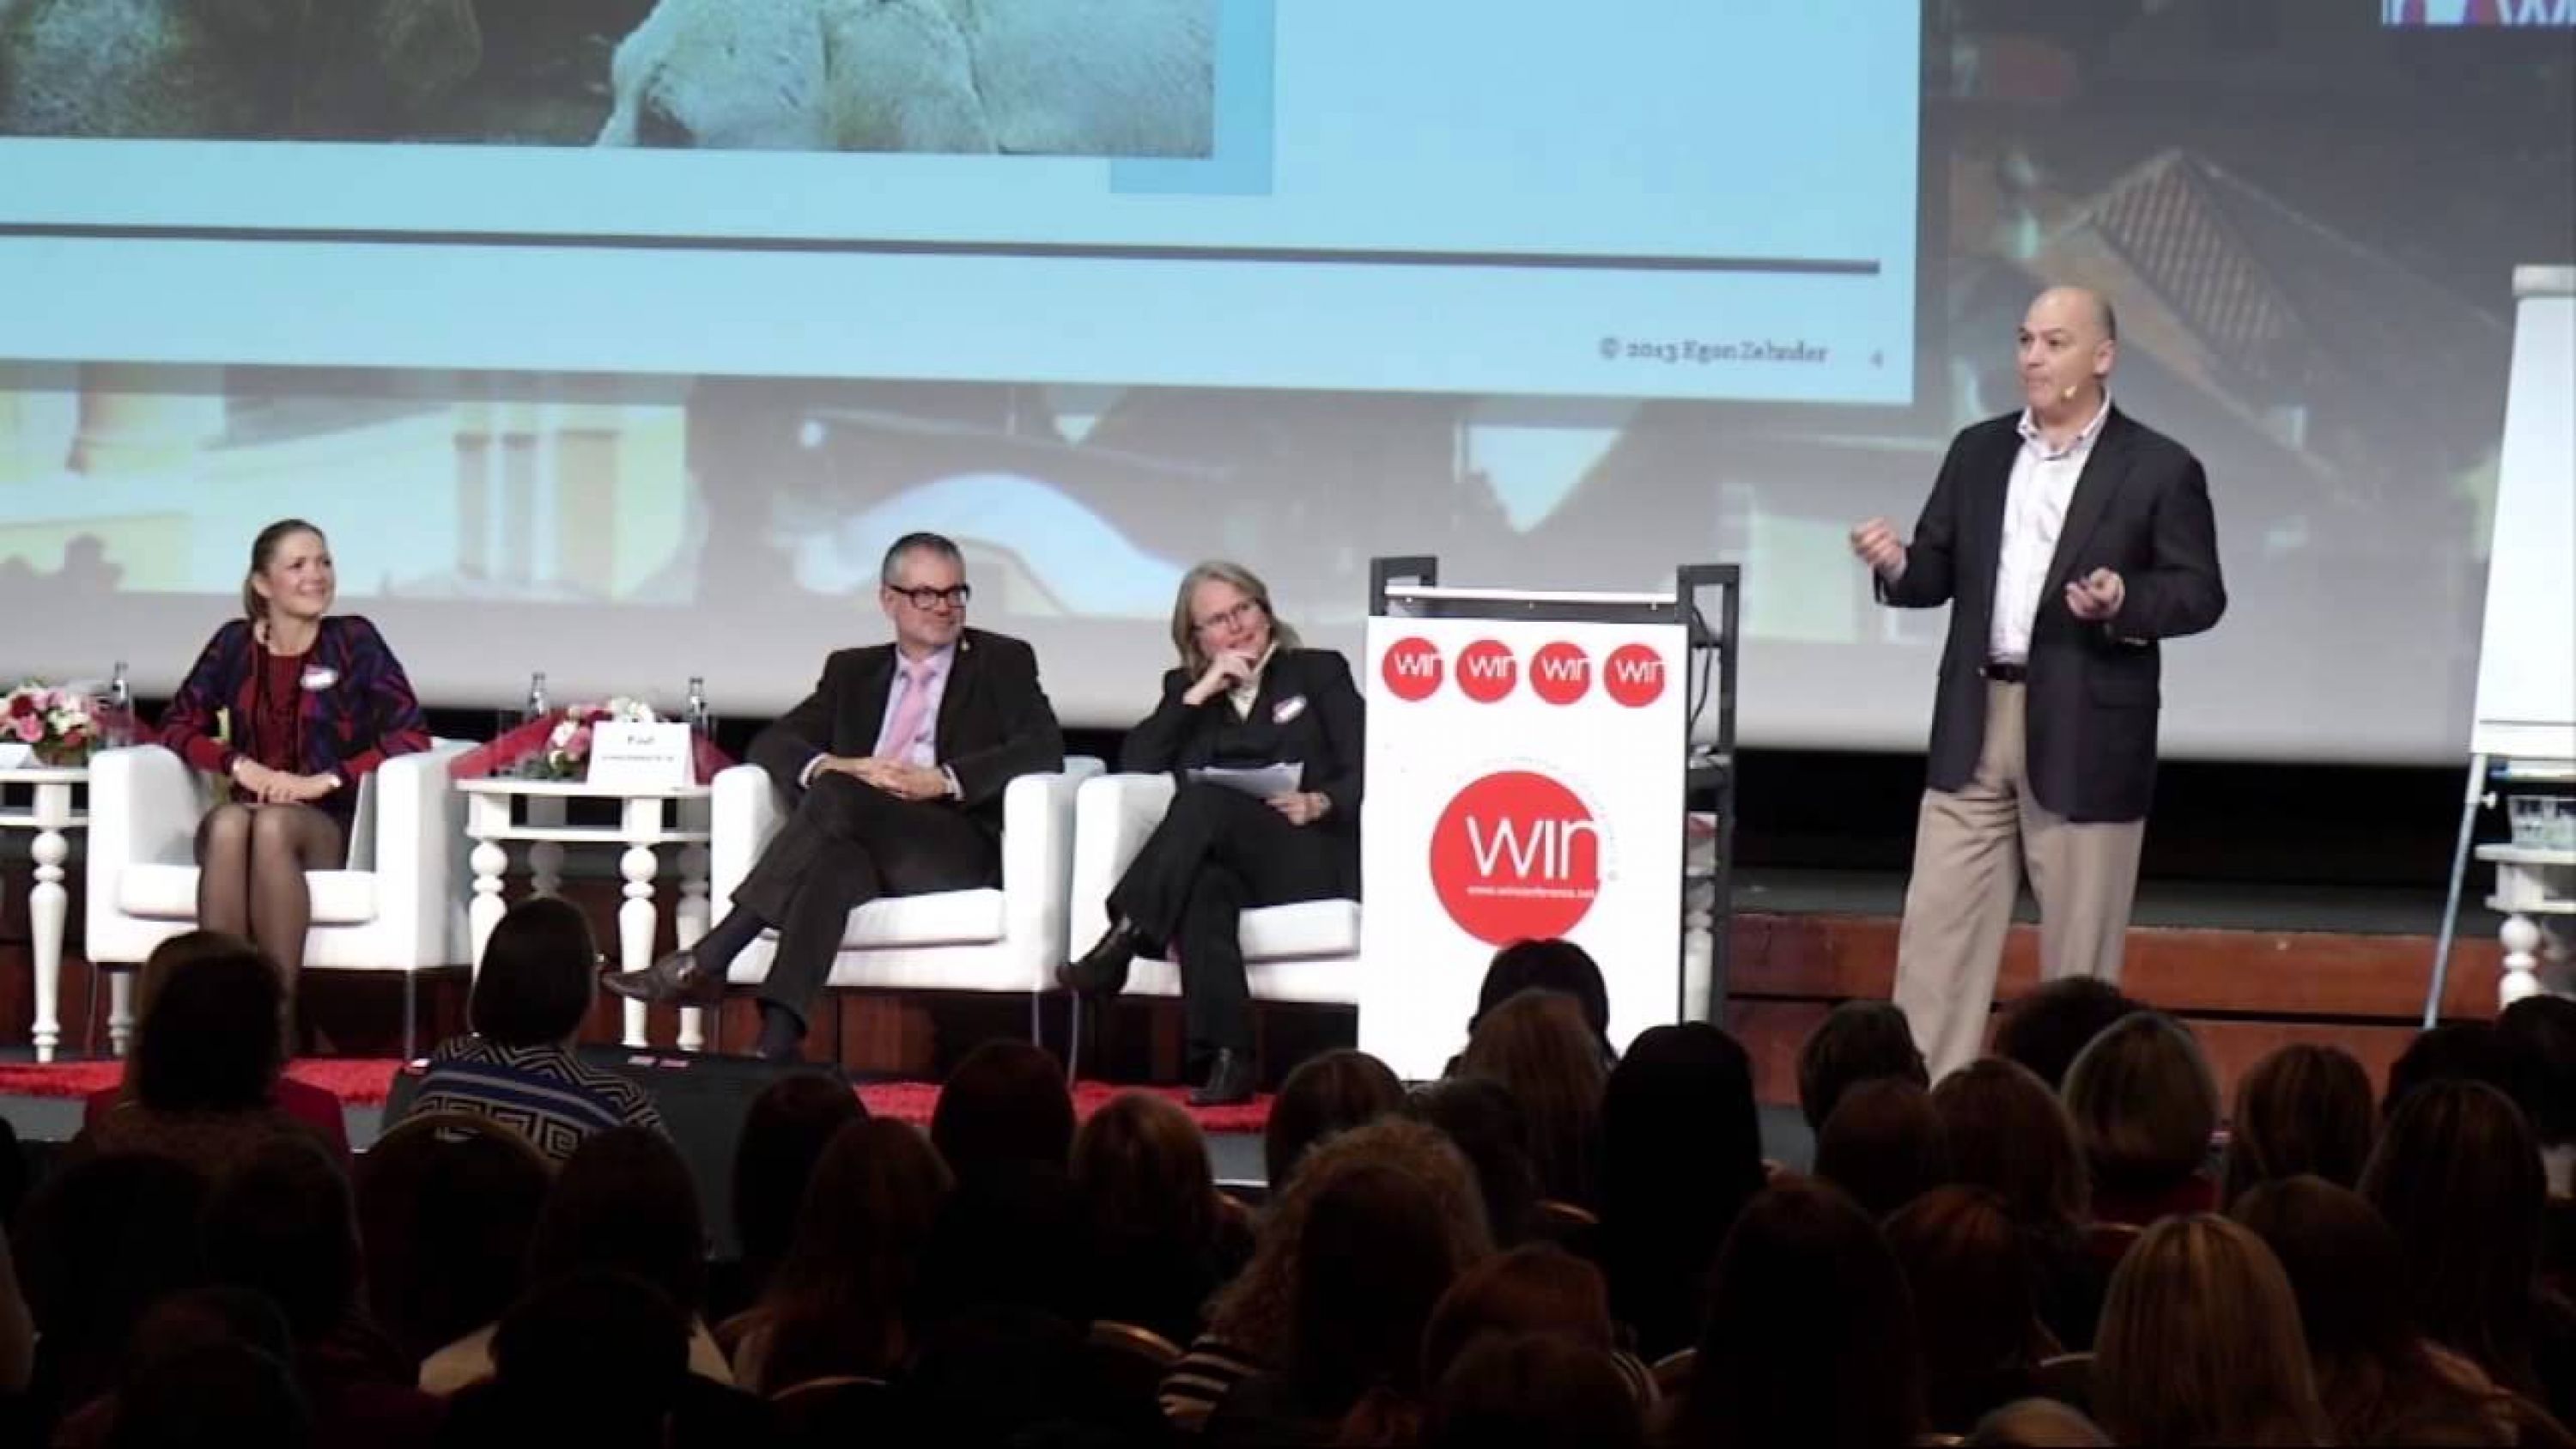 View Michel’s plenary speech at the 2013 WINConference